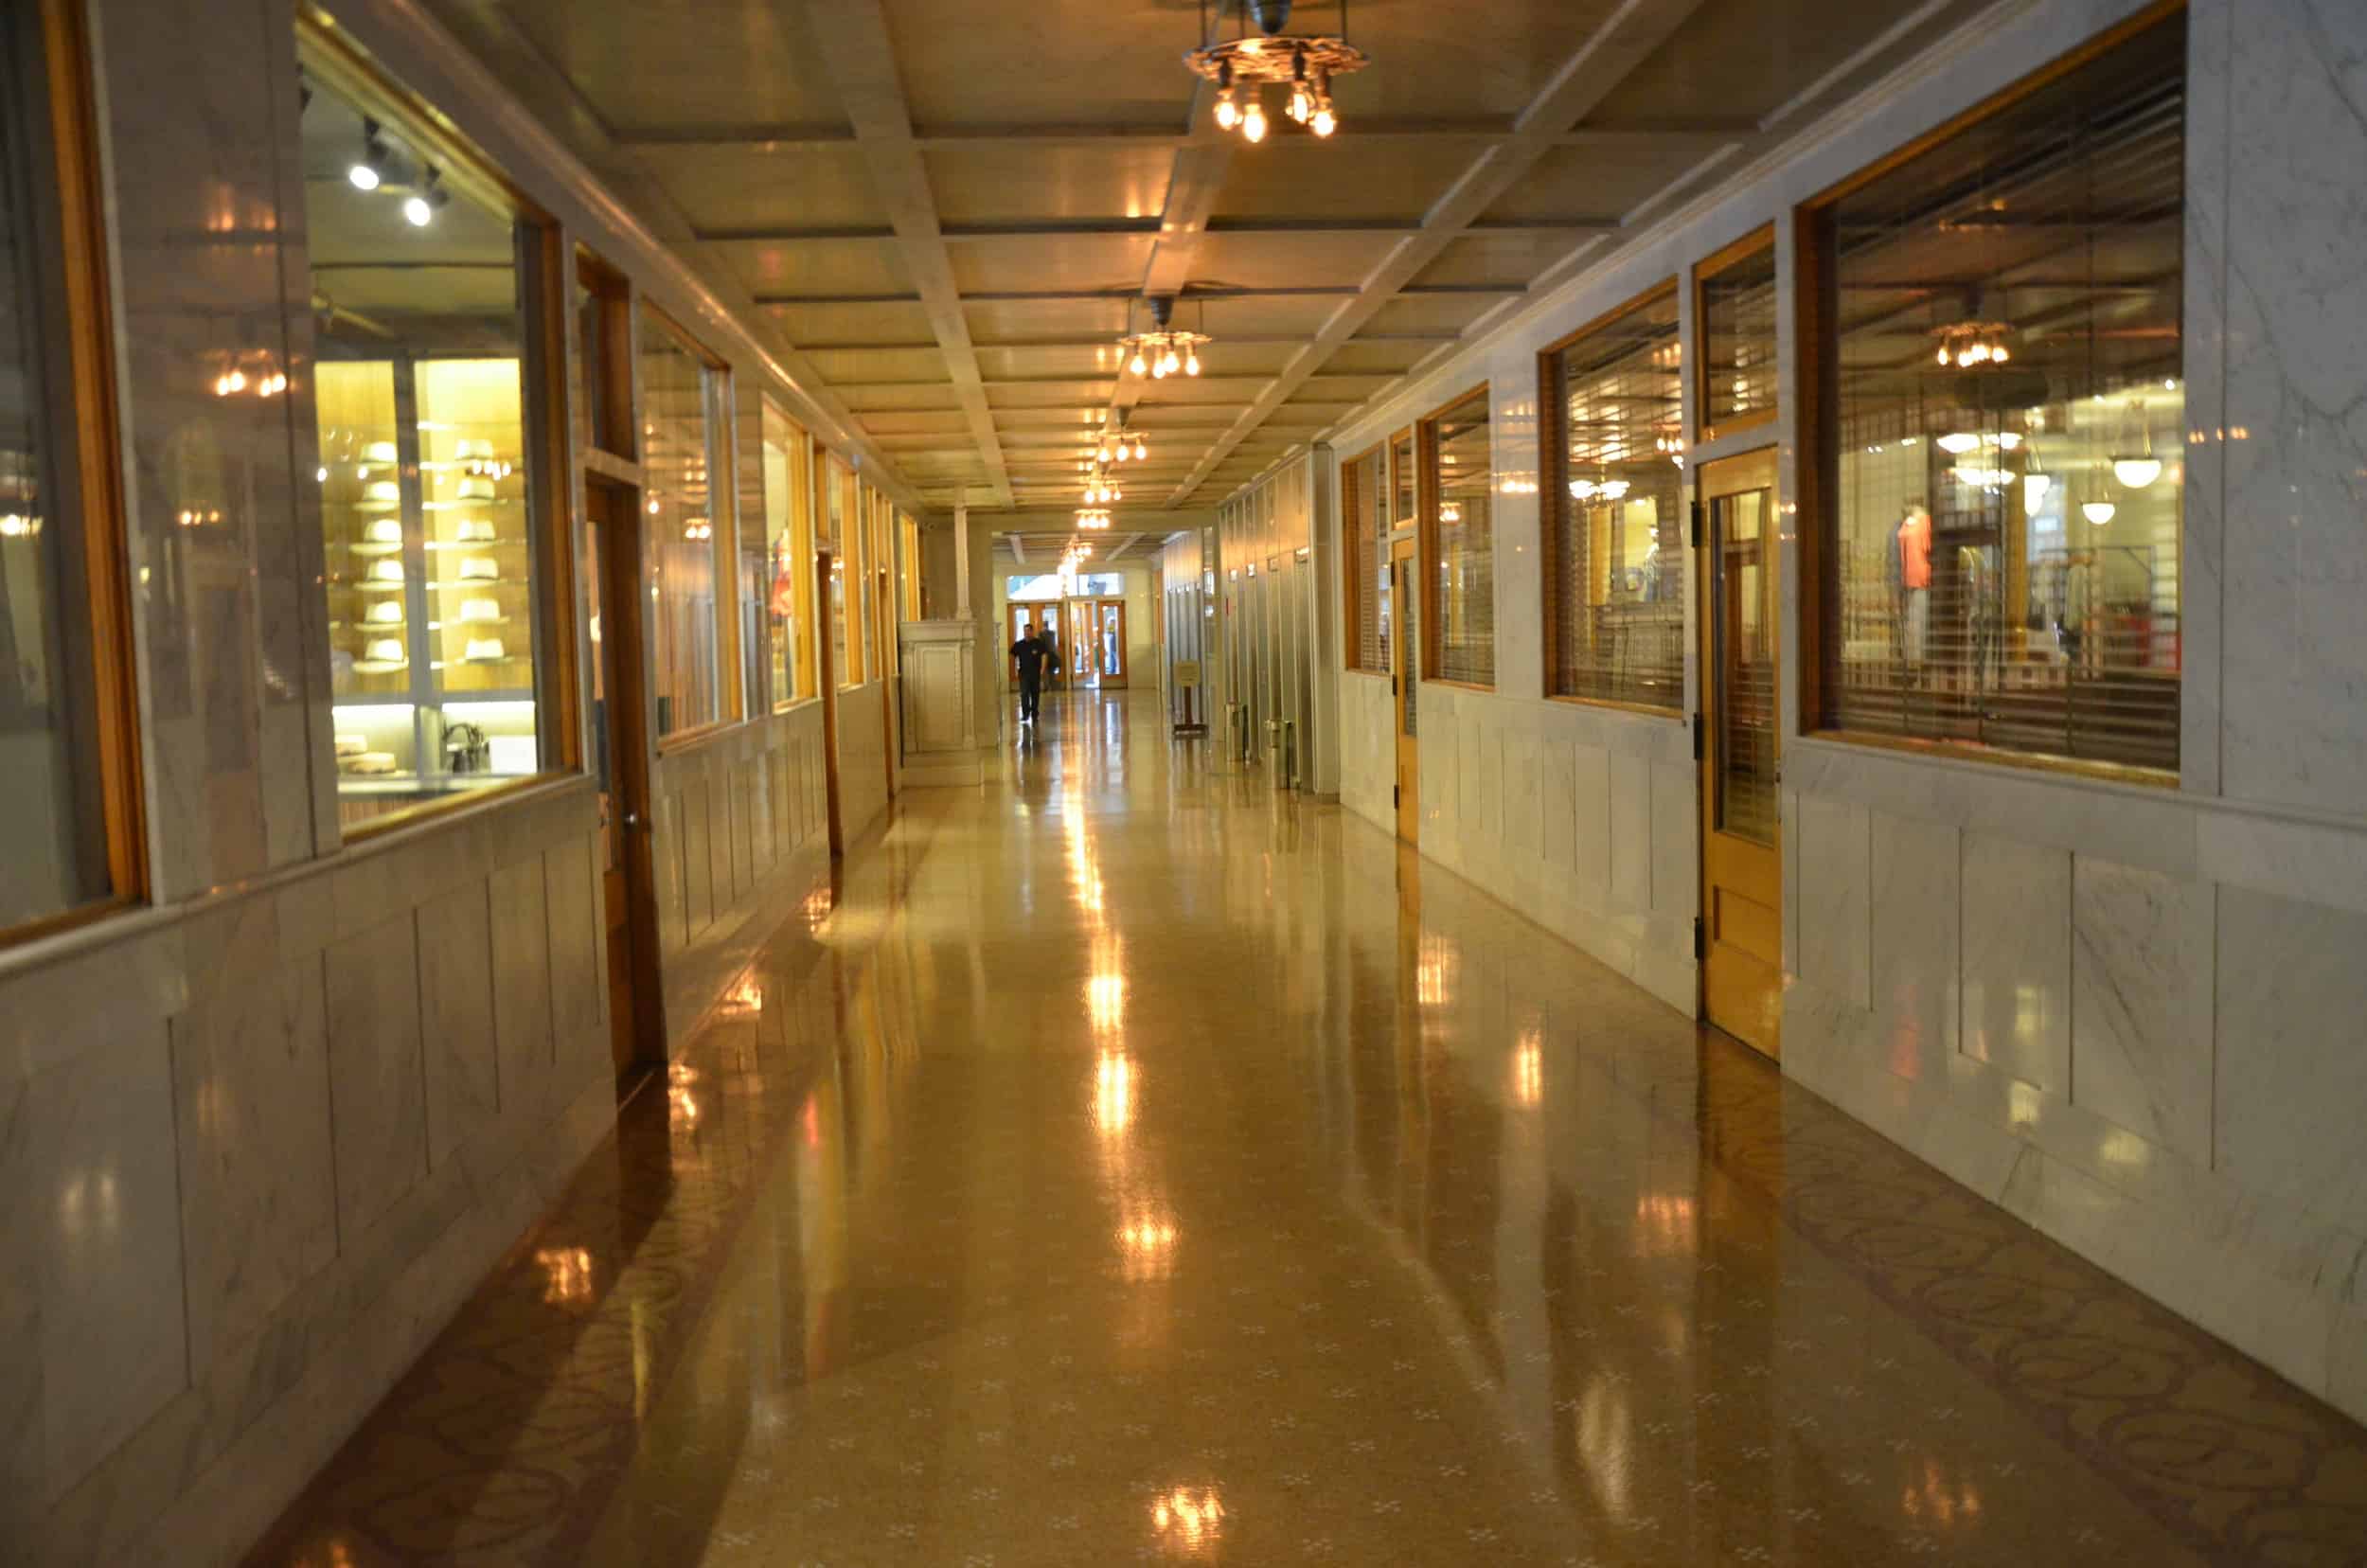 Hallway of the Monadnock Building along Dearborn Street in Chicago, Illinois